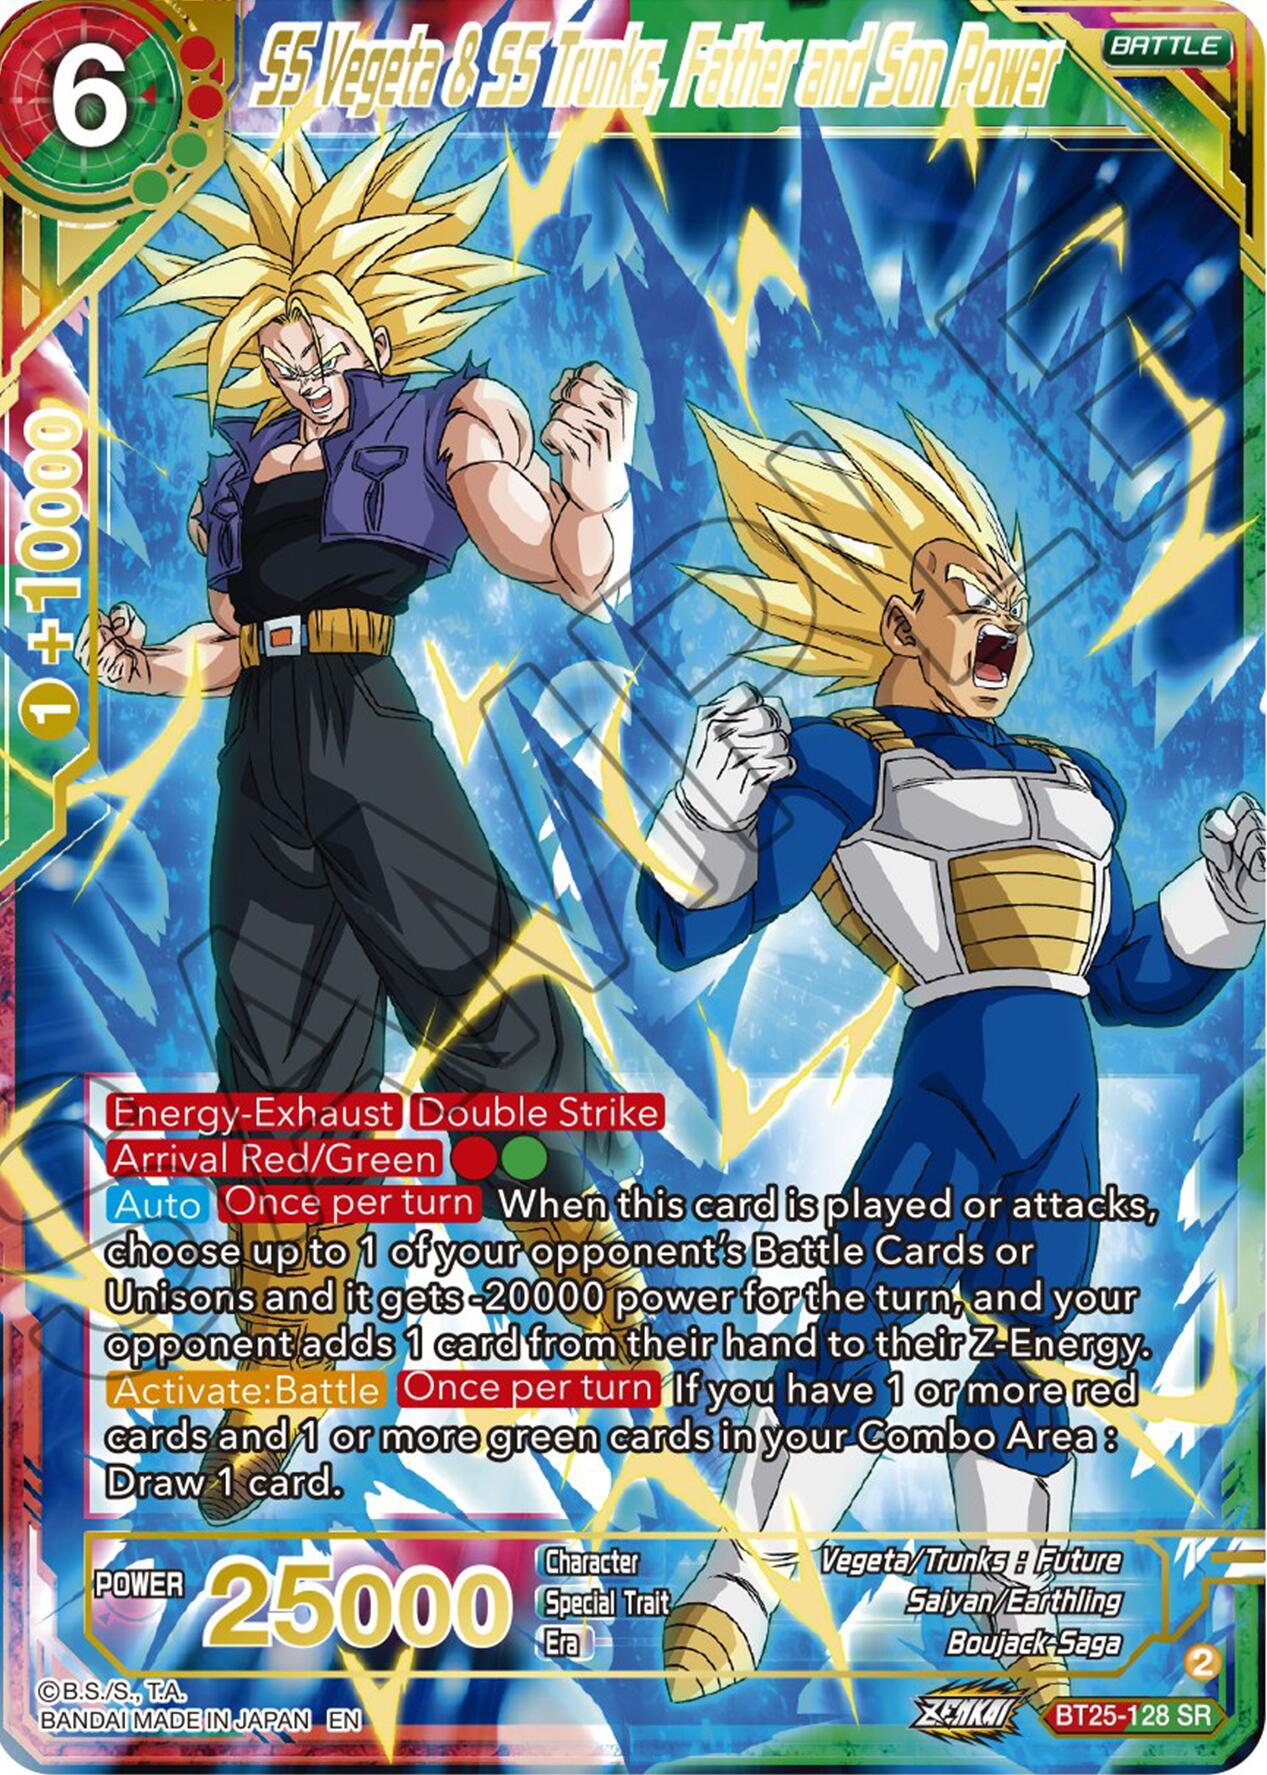 SS Vegeta & SS Trunks, Father and Son Power (BT25-128) [Legend of the Dragon Balls] | Amazing Games TCG